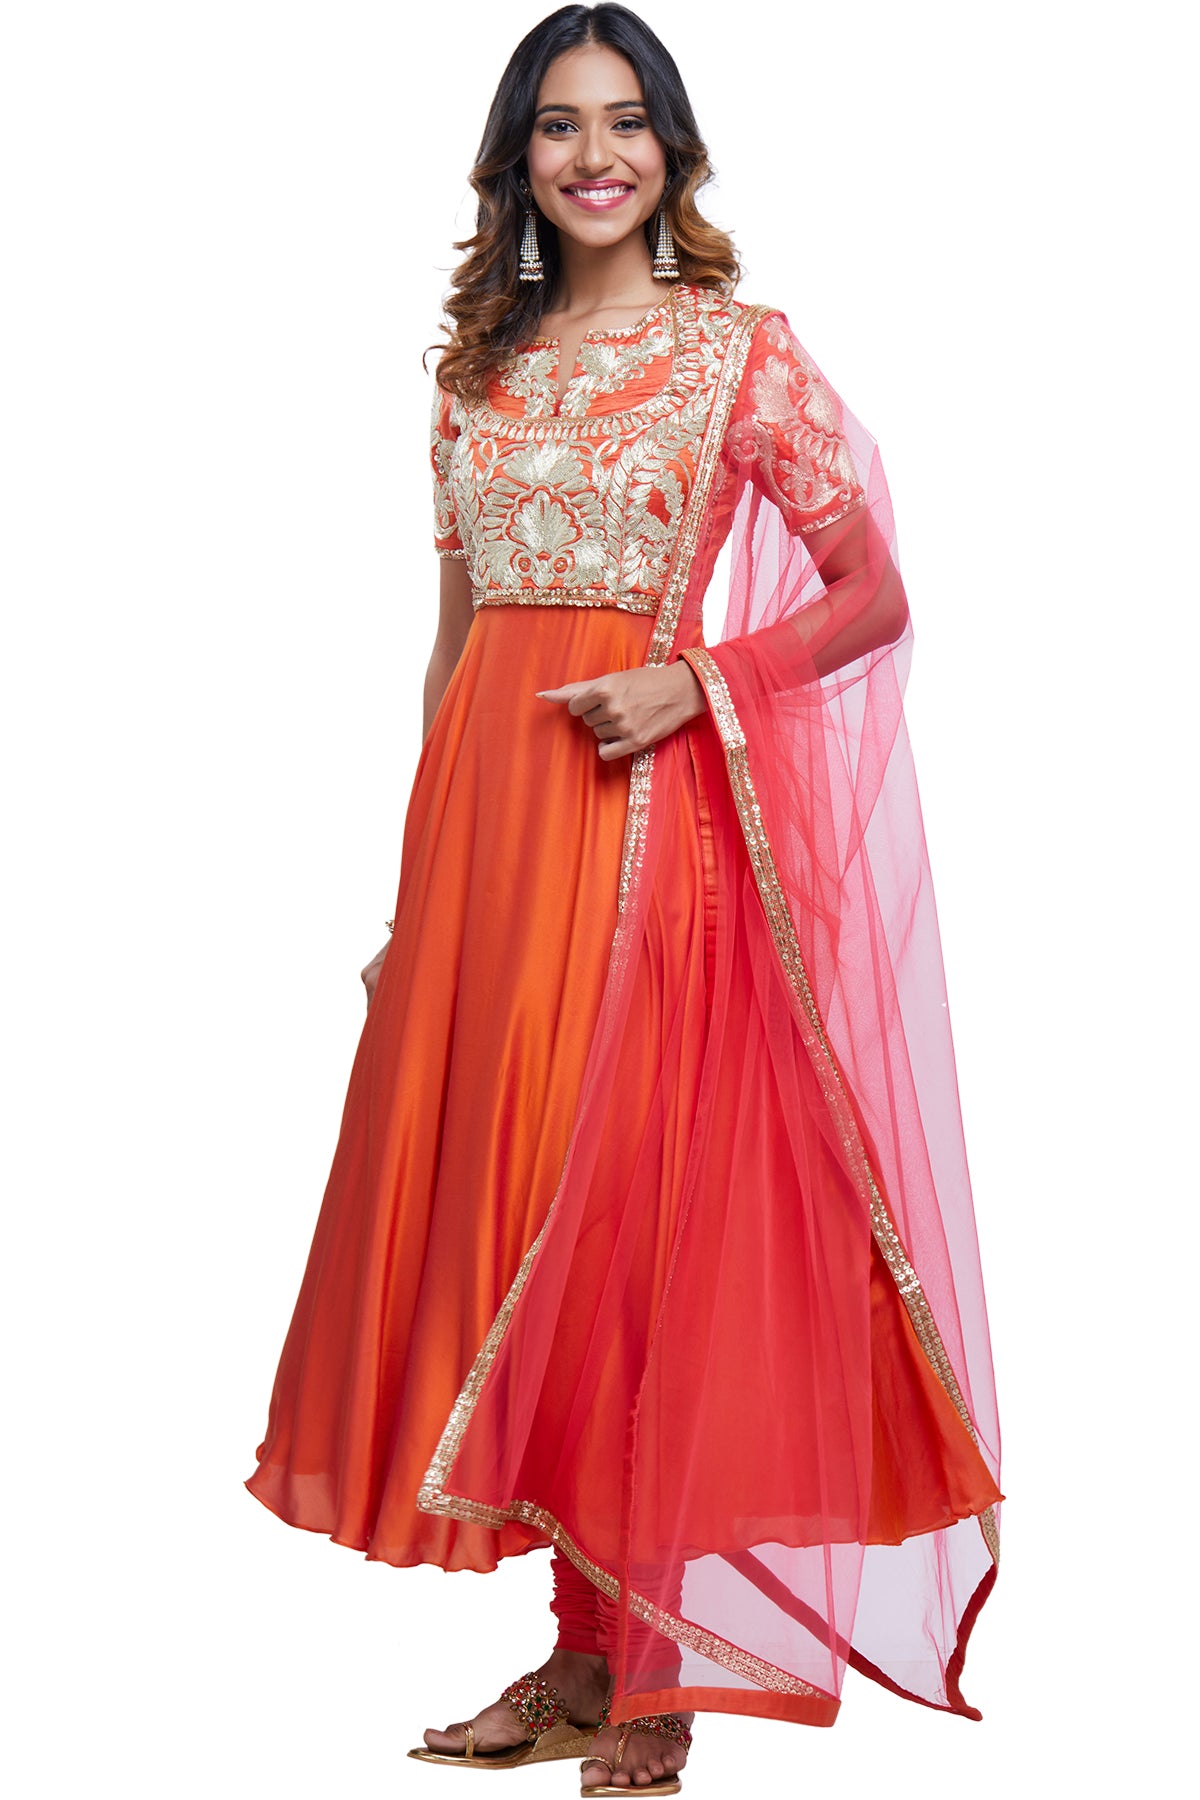 Orange silk anarkali embroidered with dori work on the bodice and net dupatta with its shine is set for you